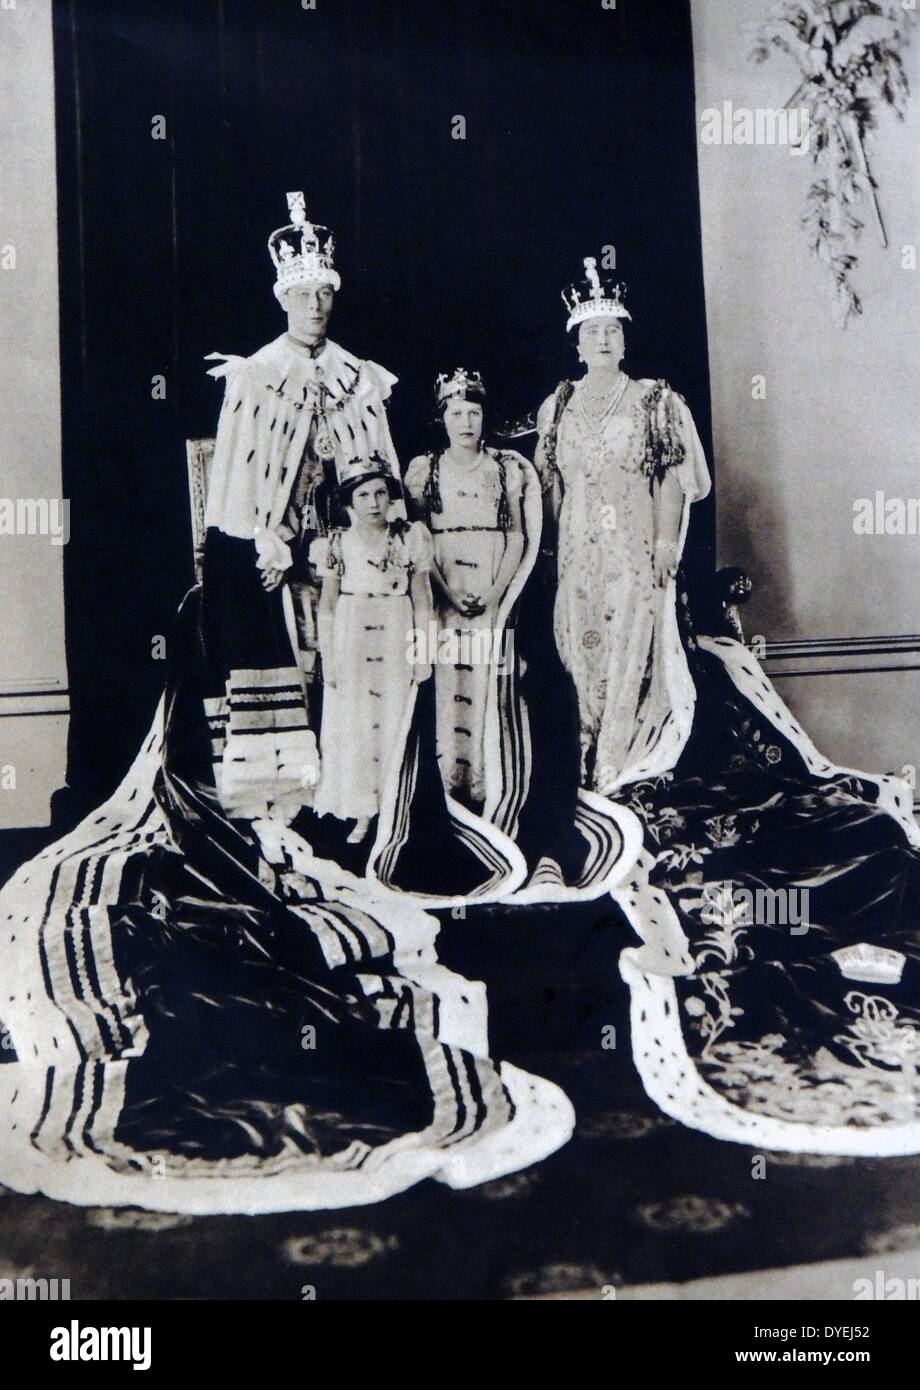 The Coronation of King George VI and Queen Elizabeth - and the two princesses in Coronation Robes, 12th May 1937. Stock Photo